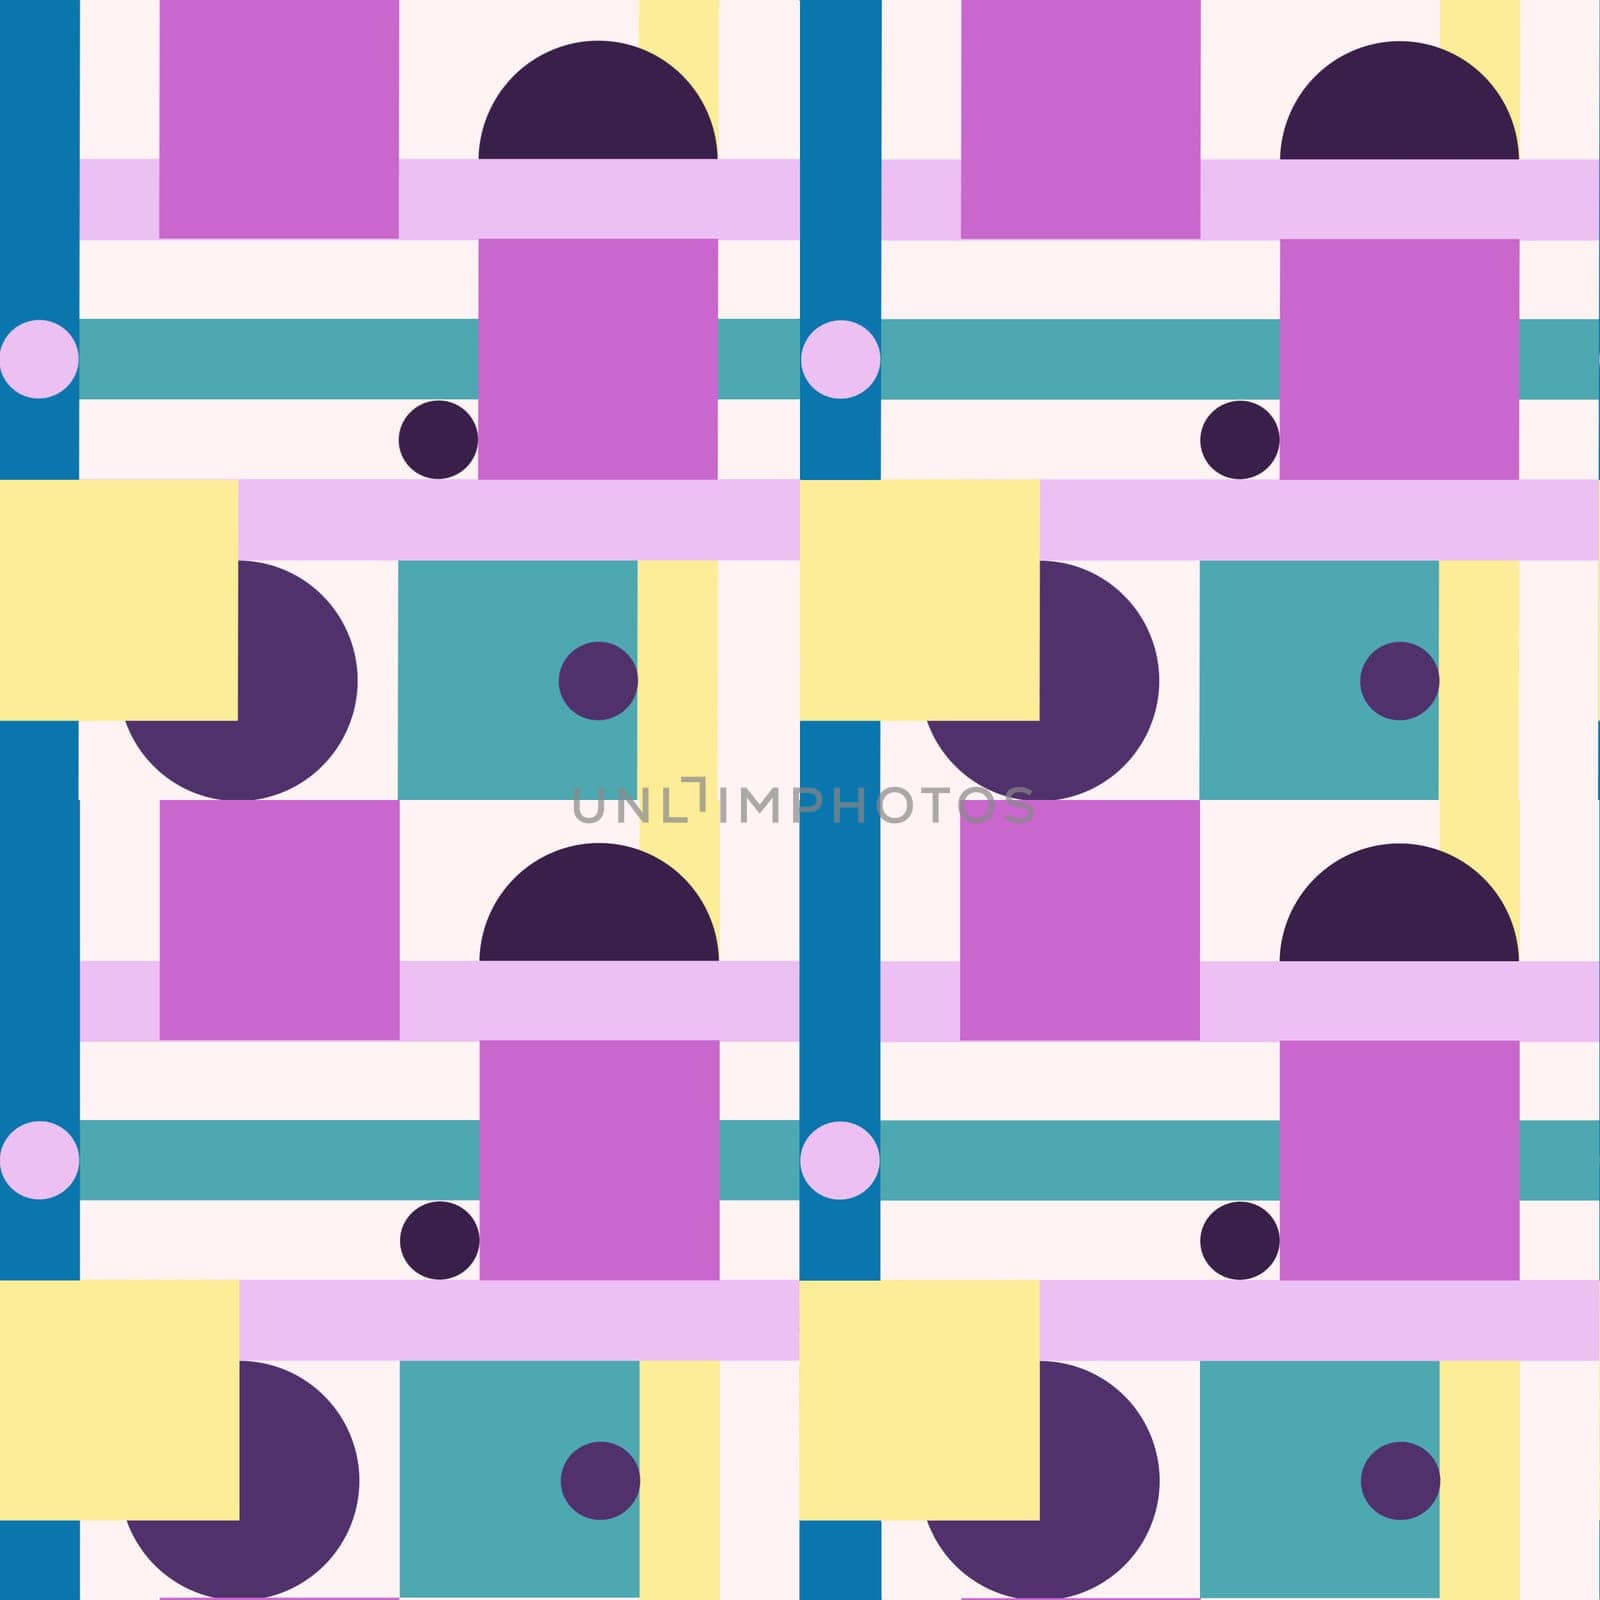 Hand drawn seamless pattern in abstract geometric style, purple blue turquoise yellow shapes squares lines circles. Mid century modern bauhaus print, 60s 70s poster wallpaper decor, colorful bright design in memphis ornament. by Lagmar